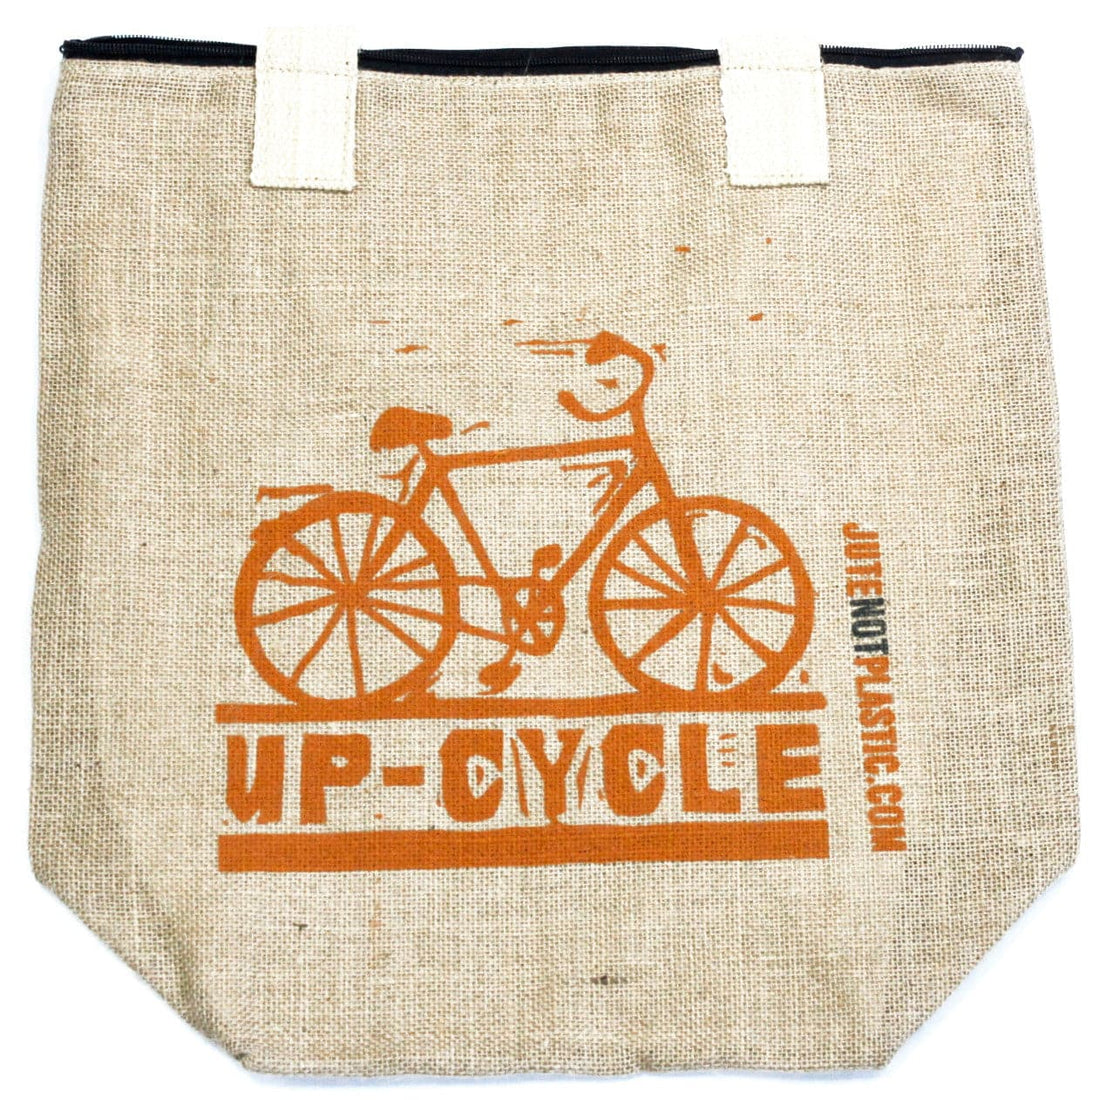 Up Cycle - best price from Maltashopper.com ECOJT-01